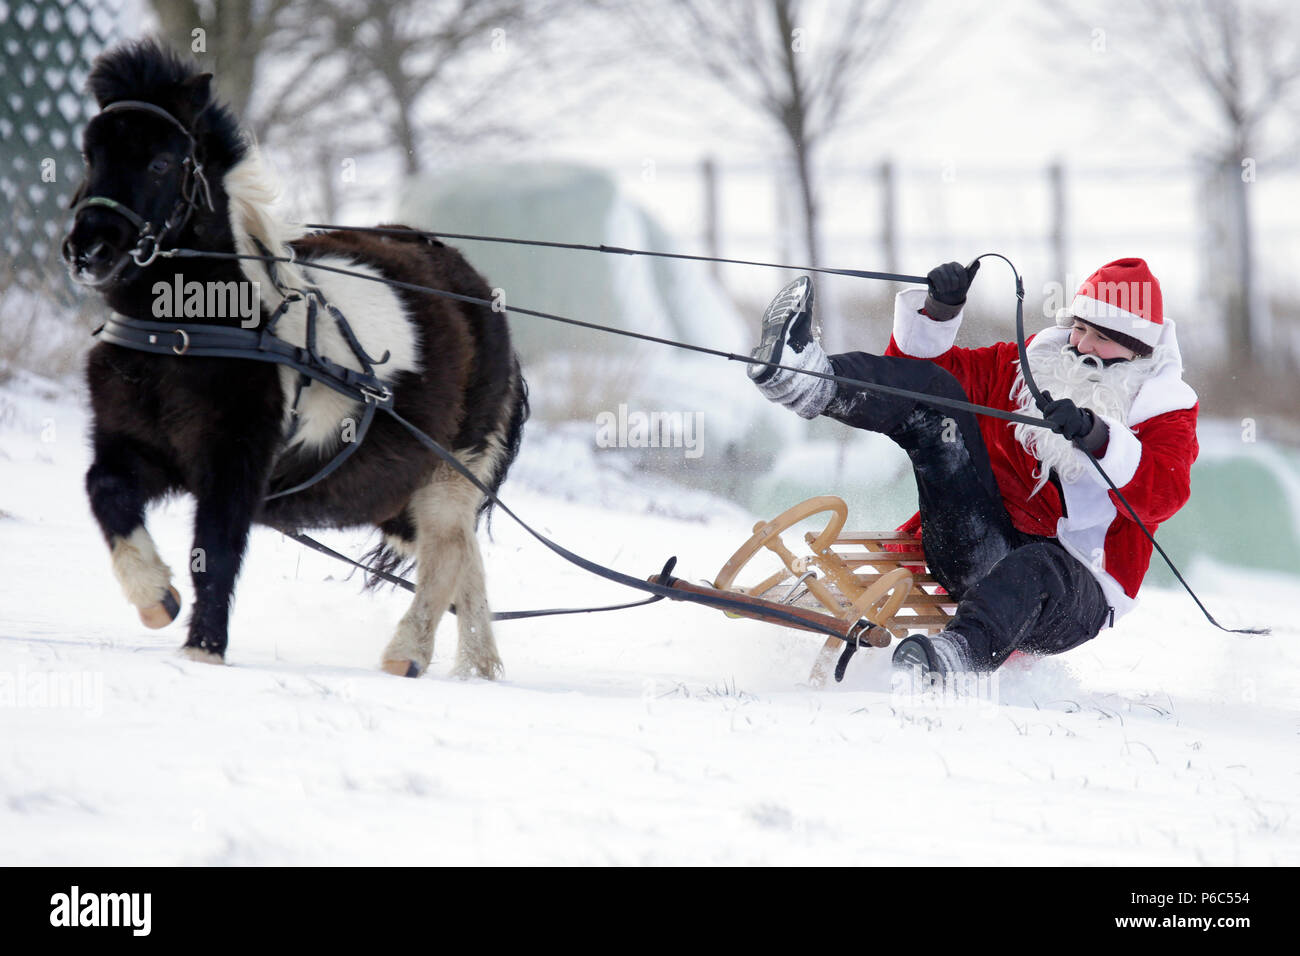 Oberoderwitz, dressed as Santa Claus woman falls from her pony sled Stock Photo